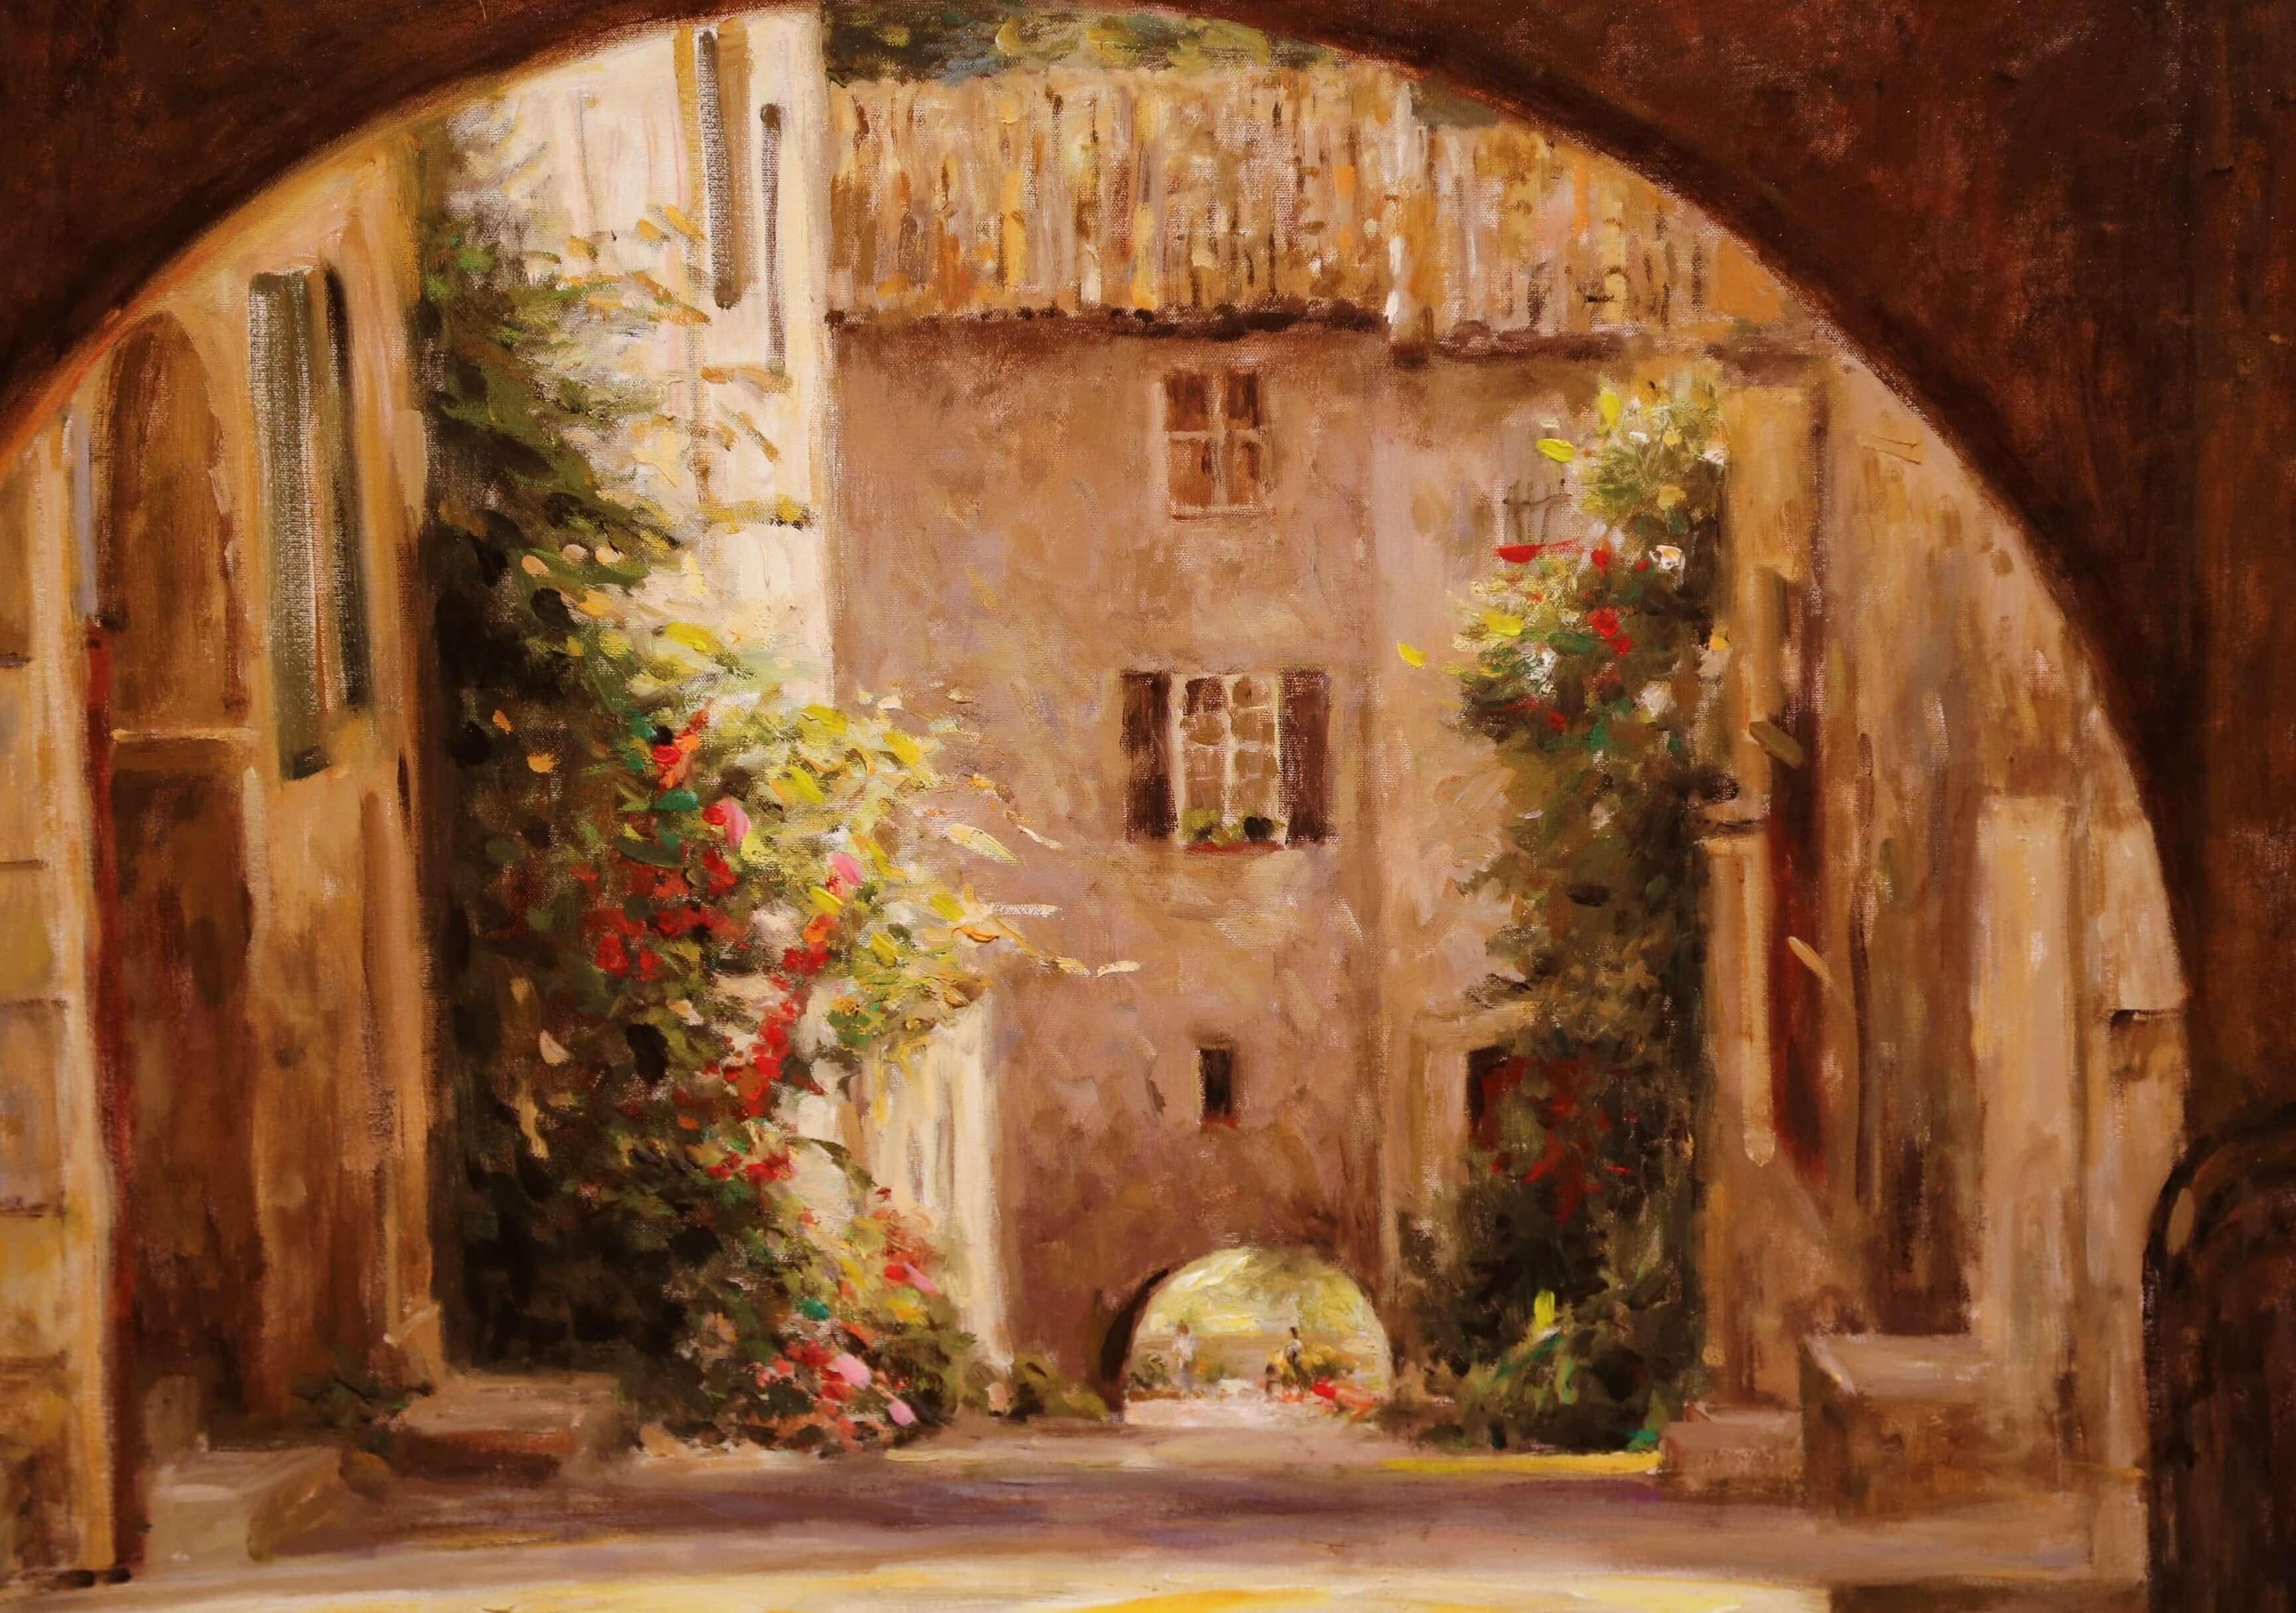 This idyllic architectural composition will be a gateway to beauty in your home. Framed by a grand arch, the courtyard scene is charming and serene. Leonard Wren's rendering of space, focus and soft, golden light will transport you to this place. In